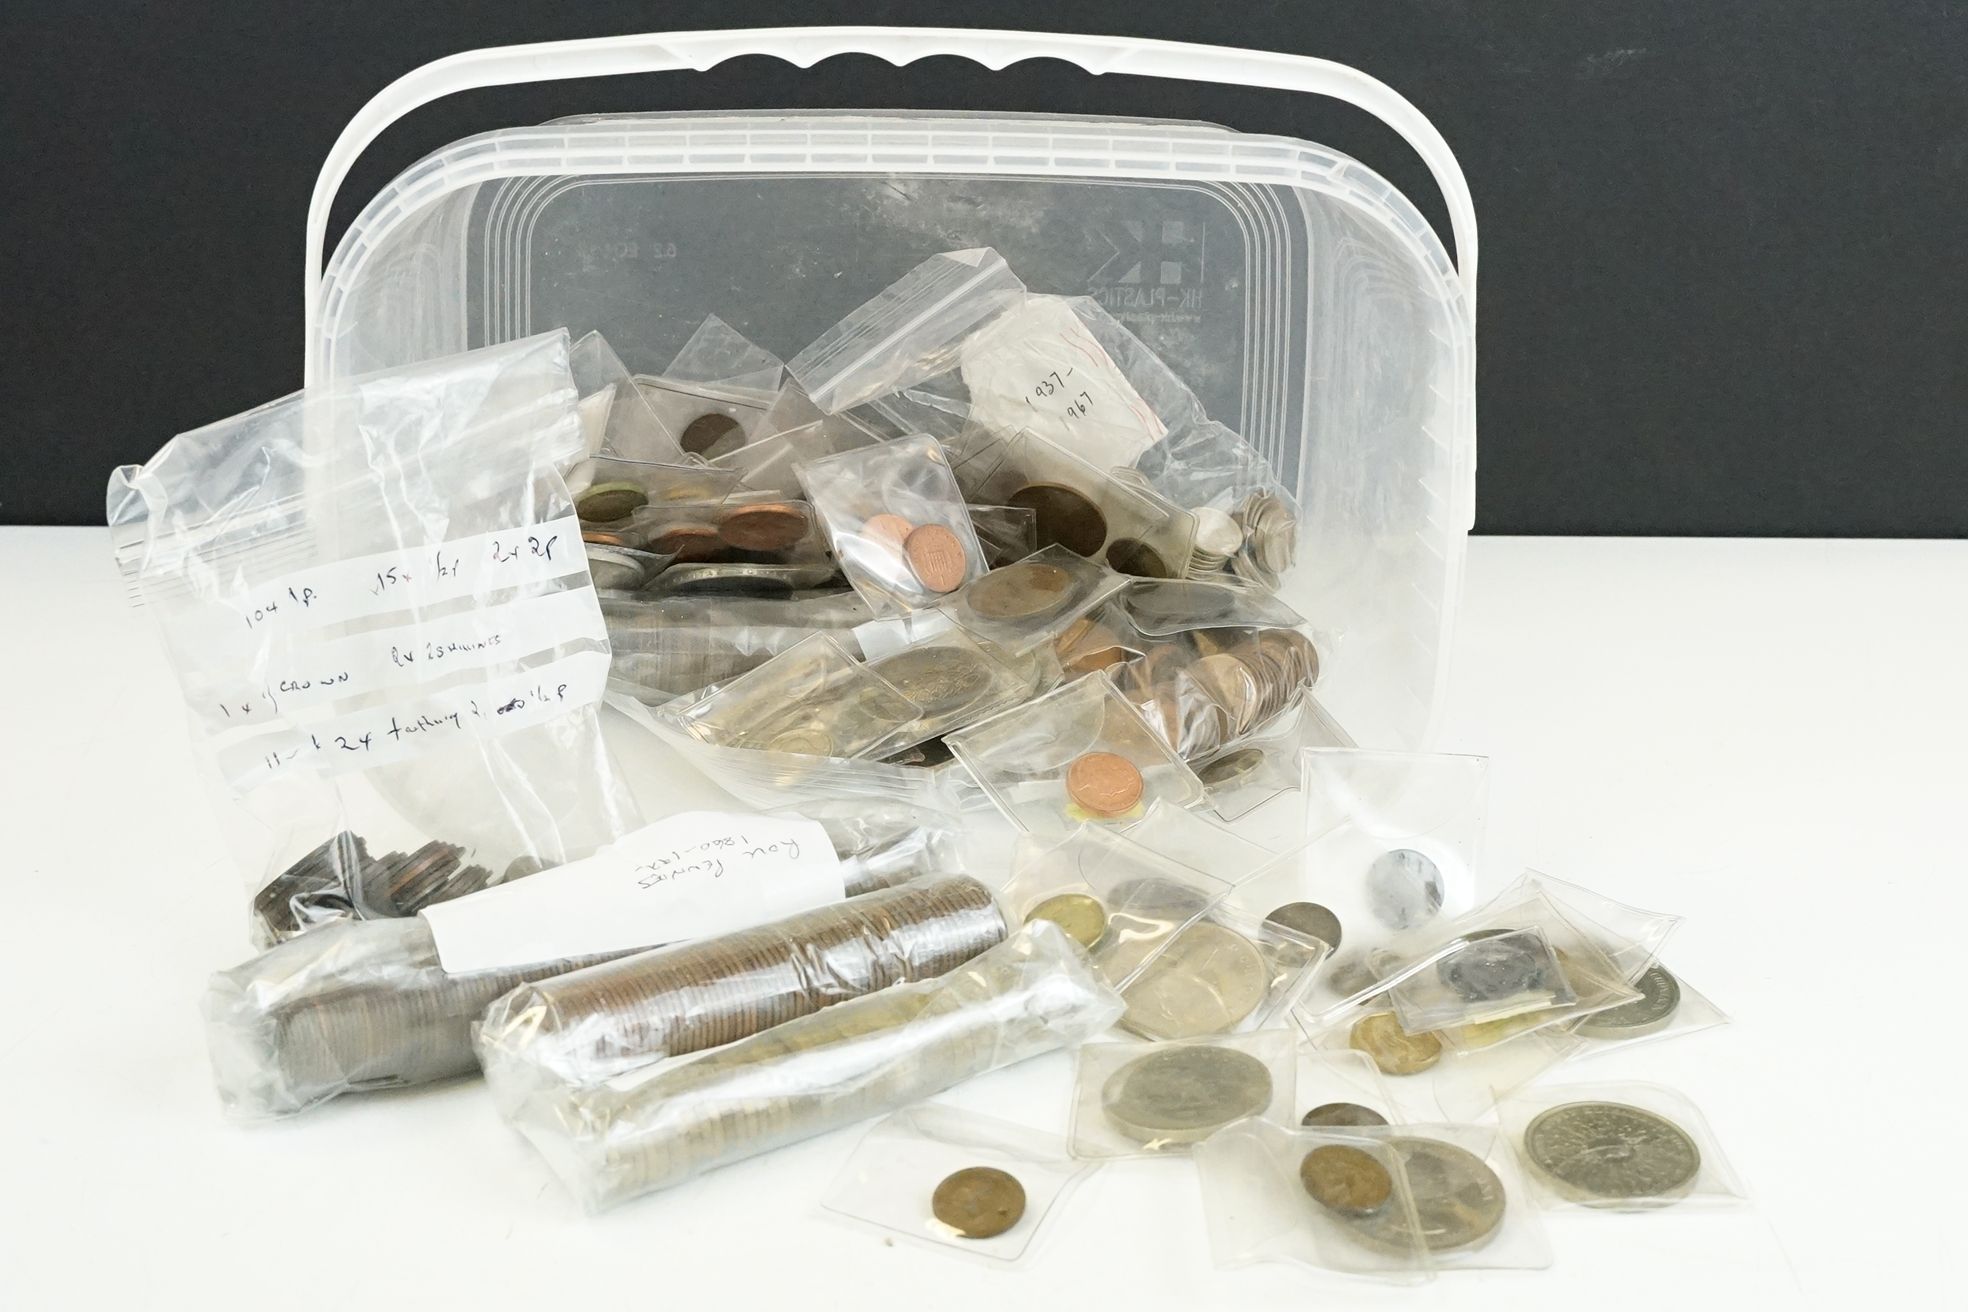 A collection of British pre decimal coins to include pennies, half pennies, threepence, sixpence